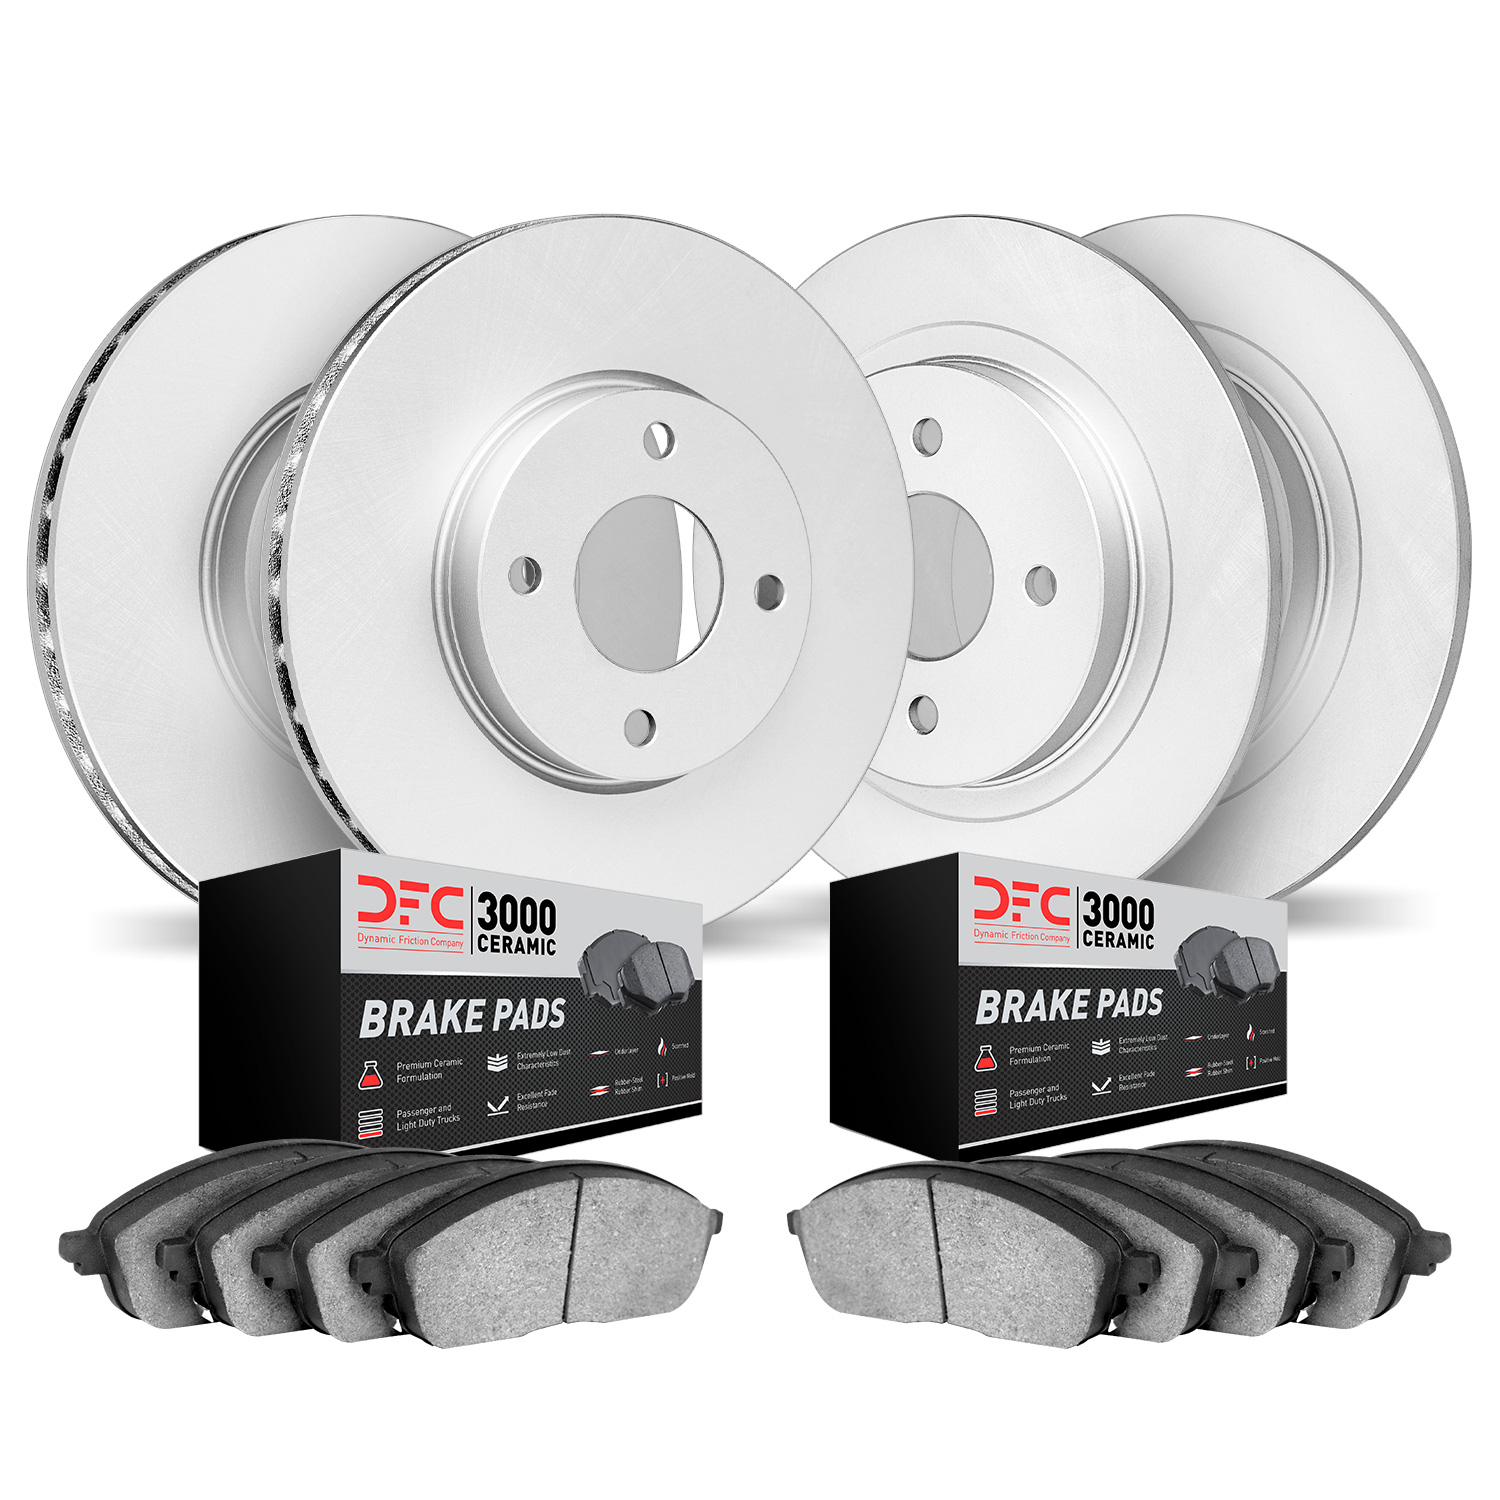 4304-76067 Geospec Brake Rotors with 3000-Series Ceramic Brake Pads Kit, 2012-2018 Lexus/Toyota/Scion, Position: Front and Rear